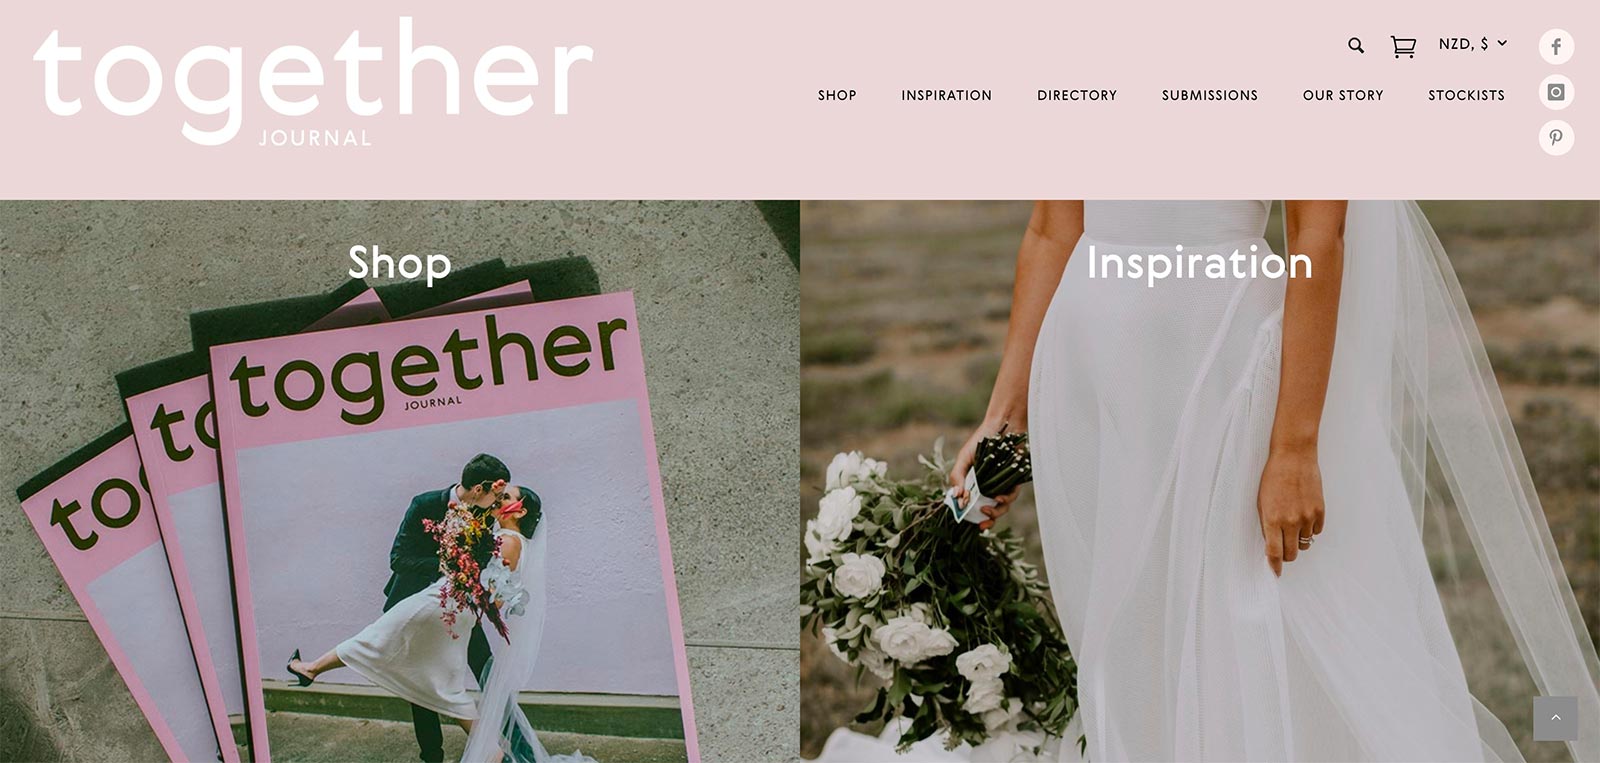 Together Journal website by BE Business